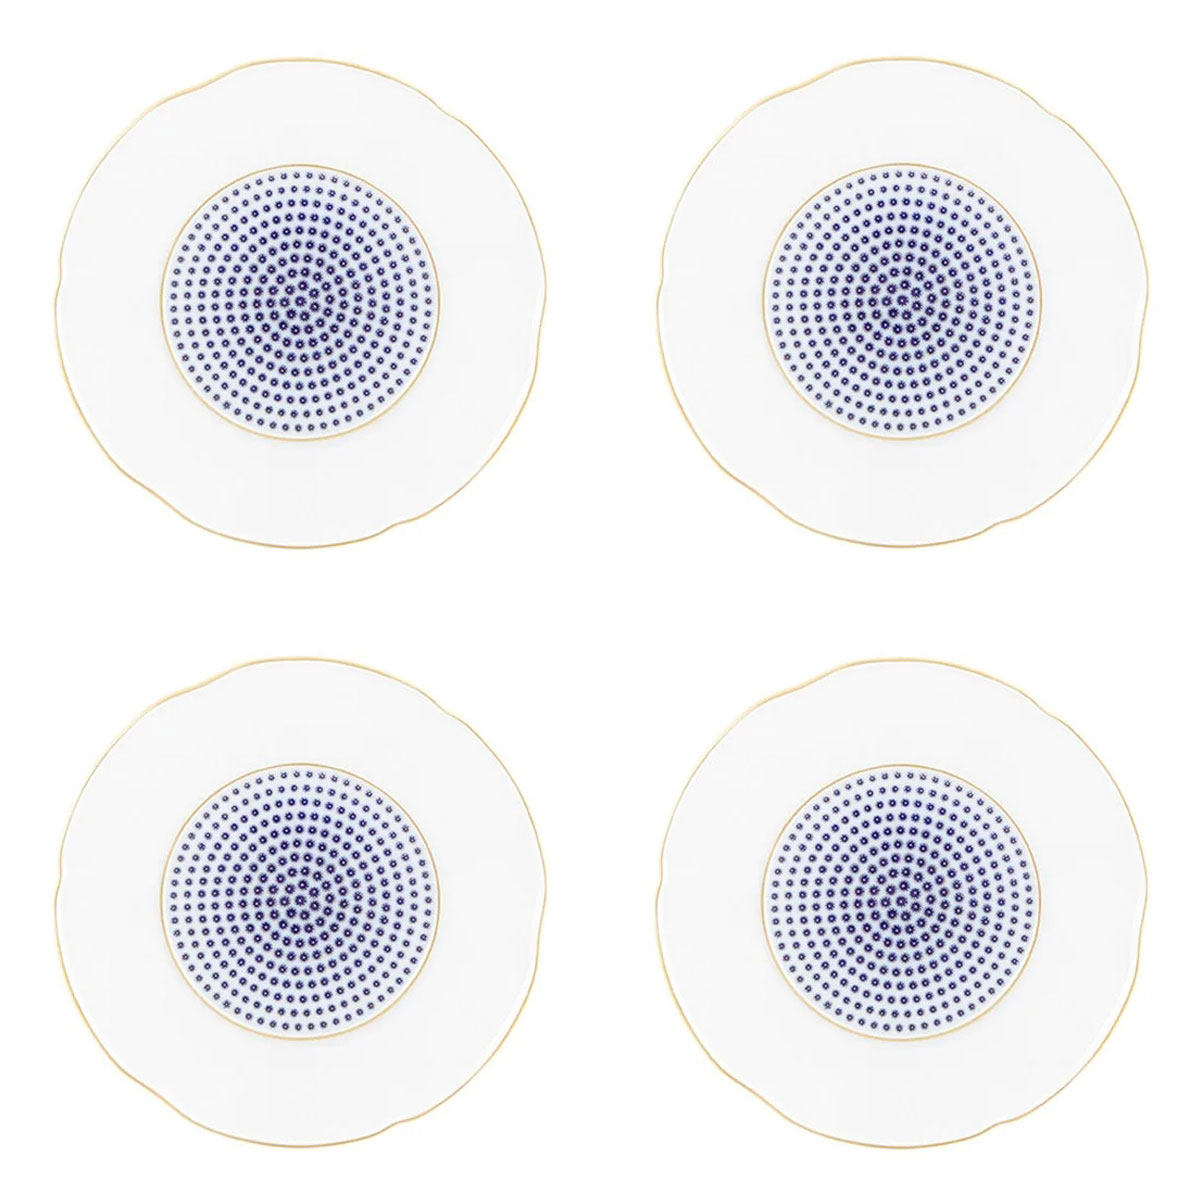 Vista Alegre Porcelain Constellation D'Or Bread and Butter Plate, Set of 4